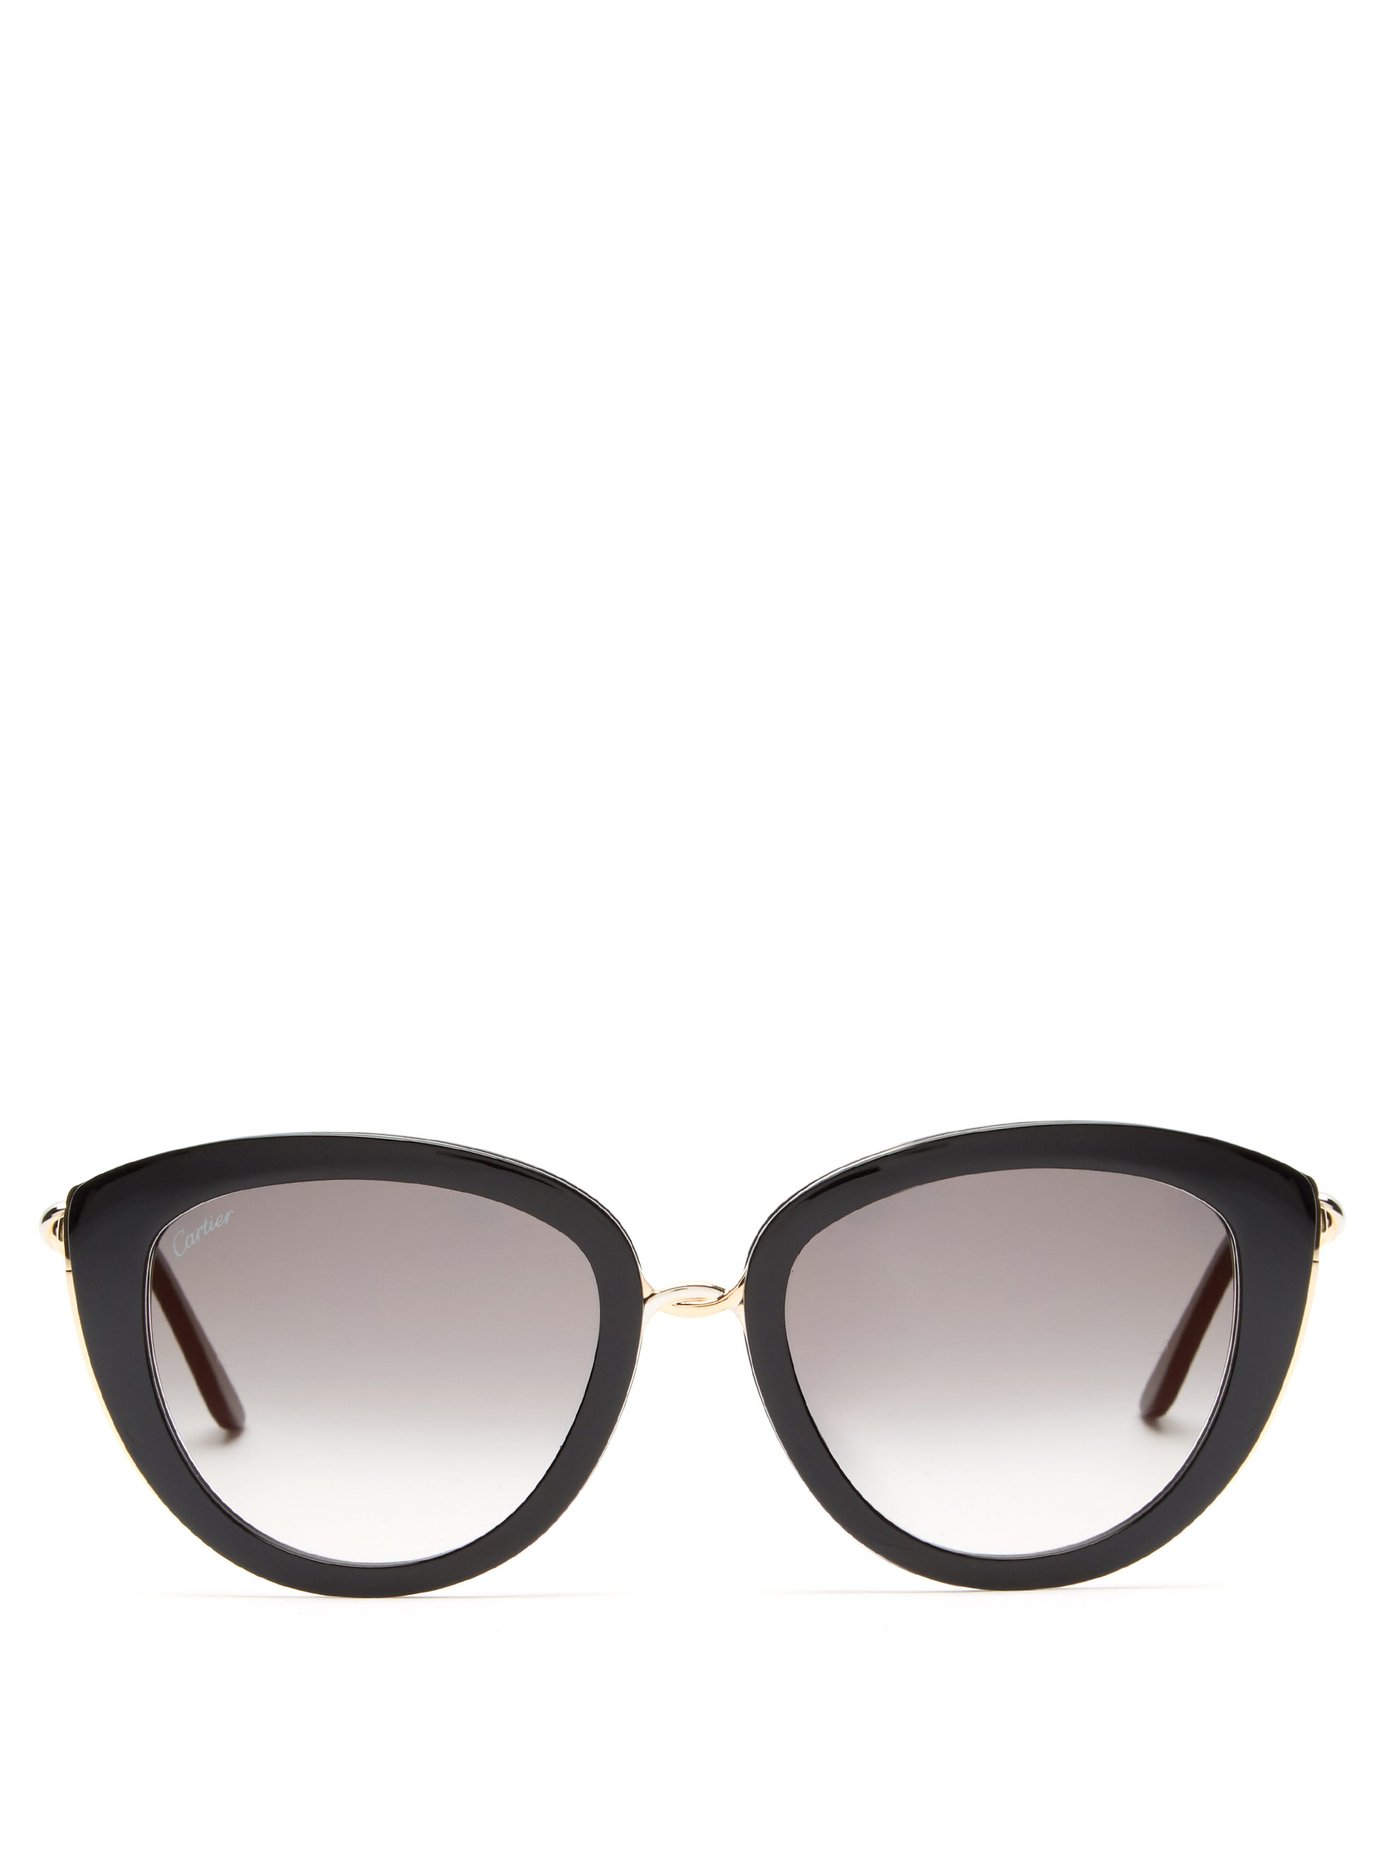 cartier black with gold temples mens sunglasses